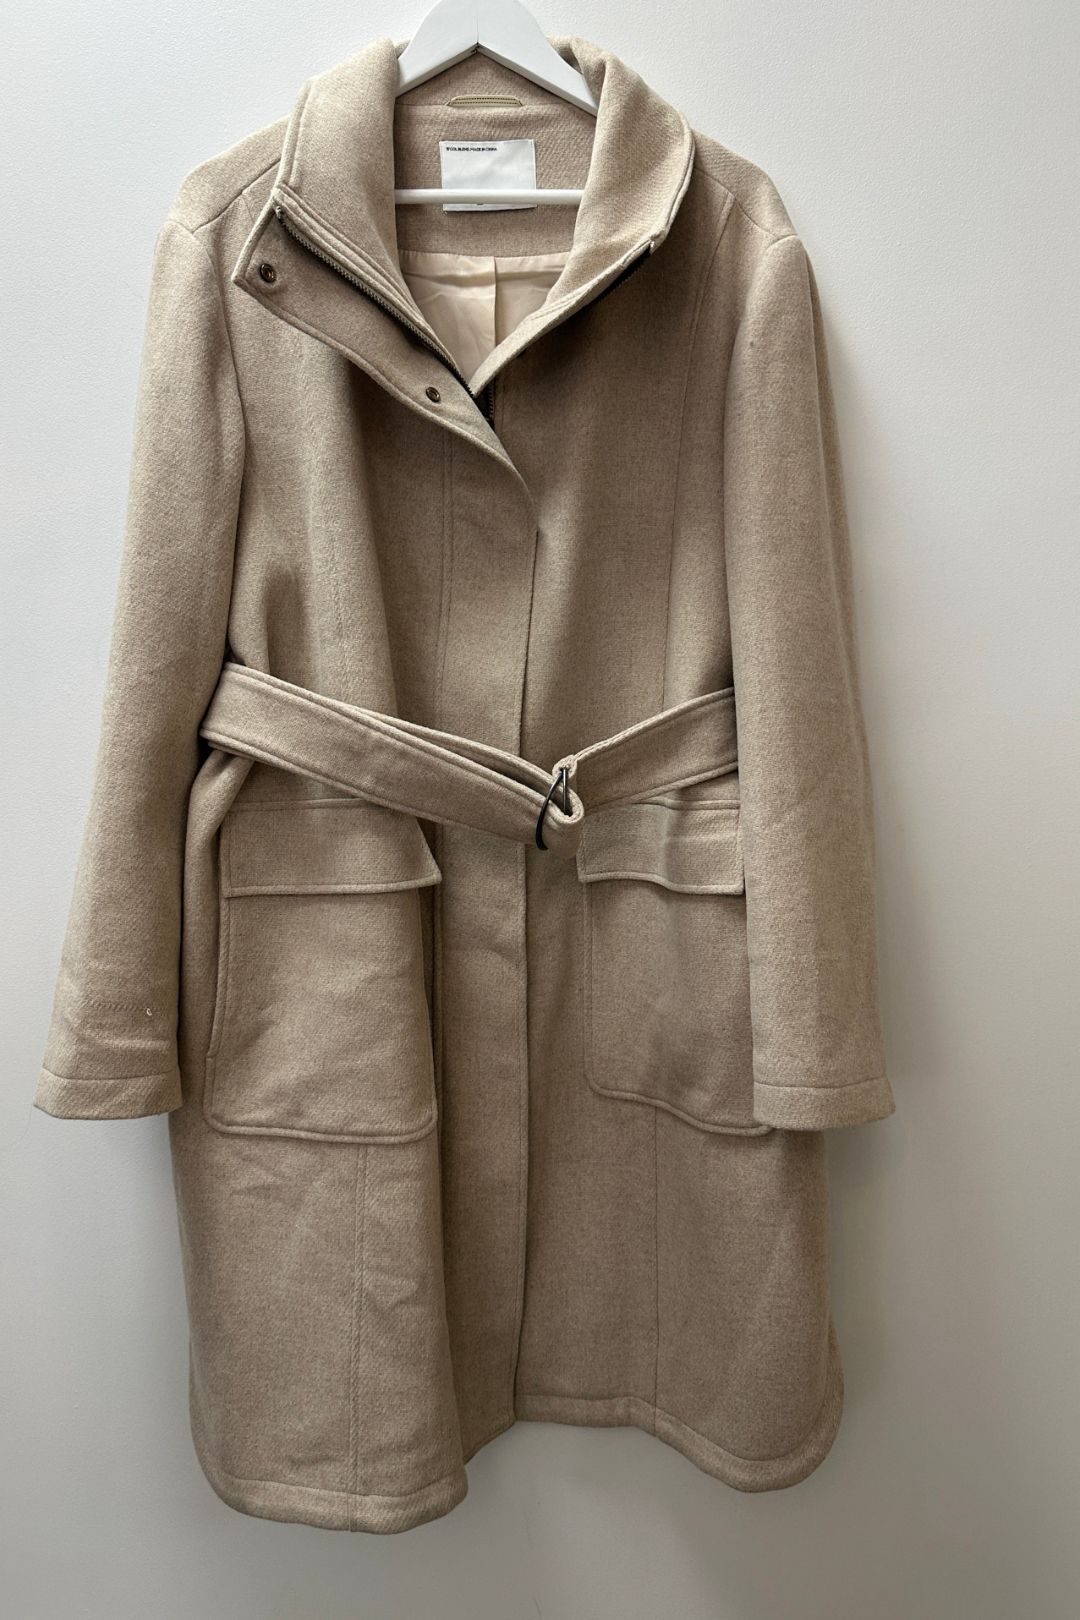 Commonry The Wool Twill Utility Coat in Beige